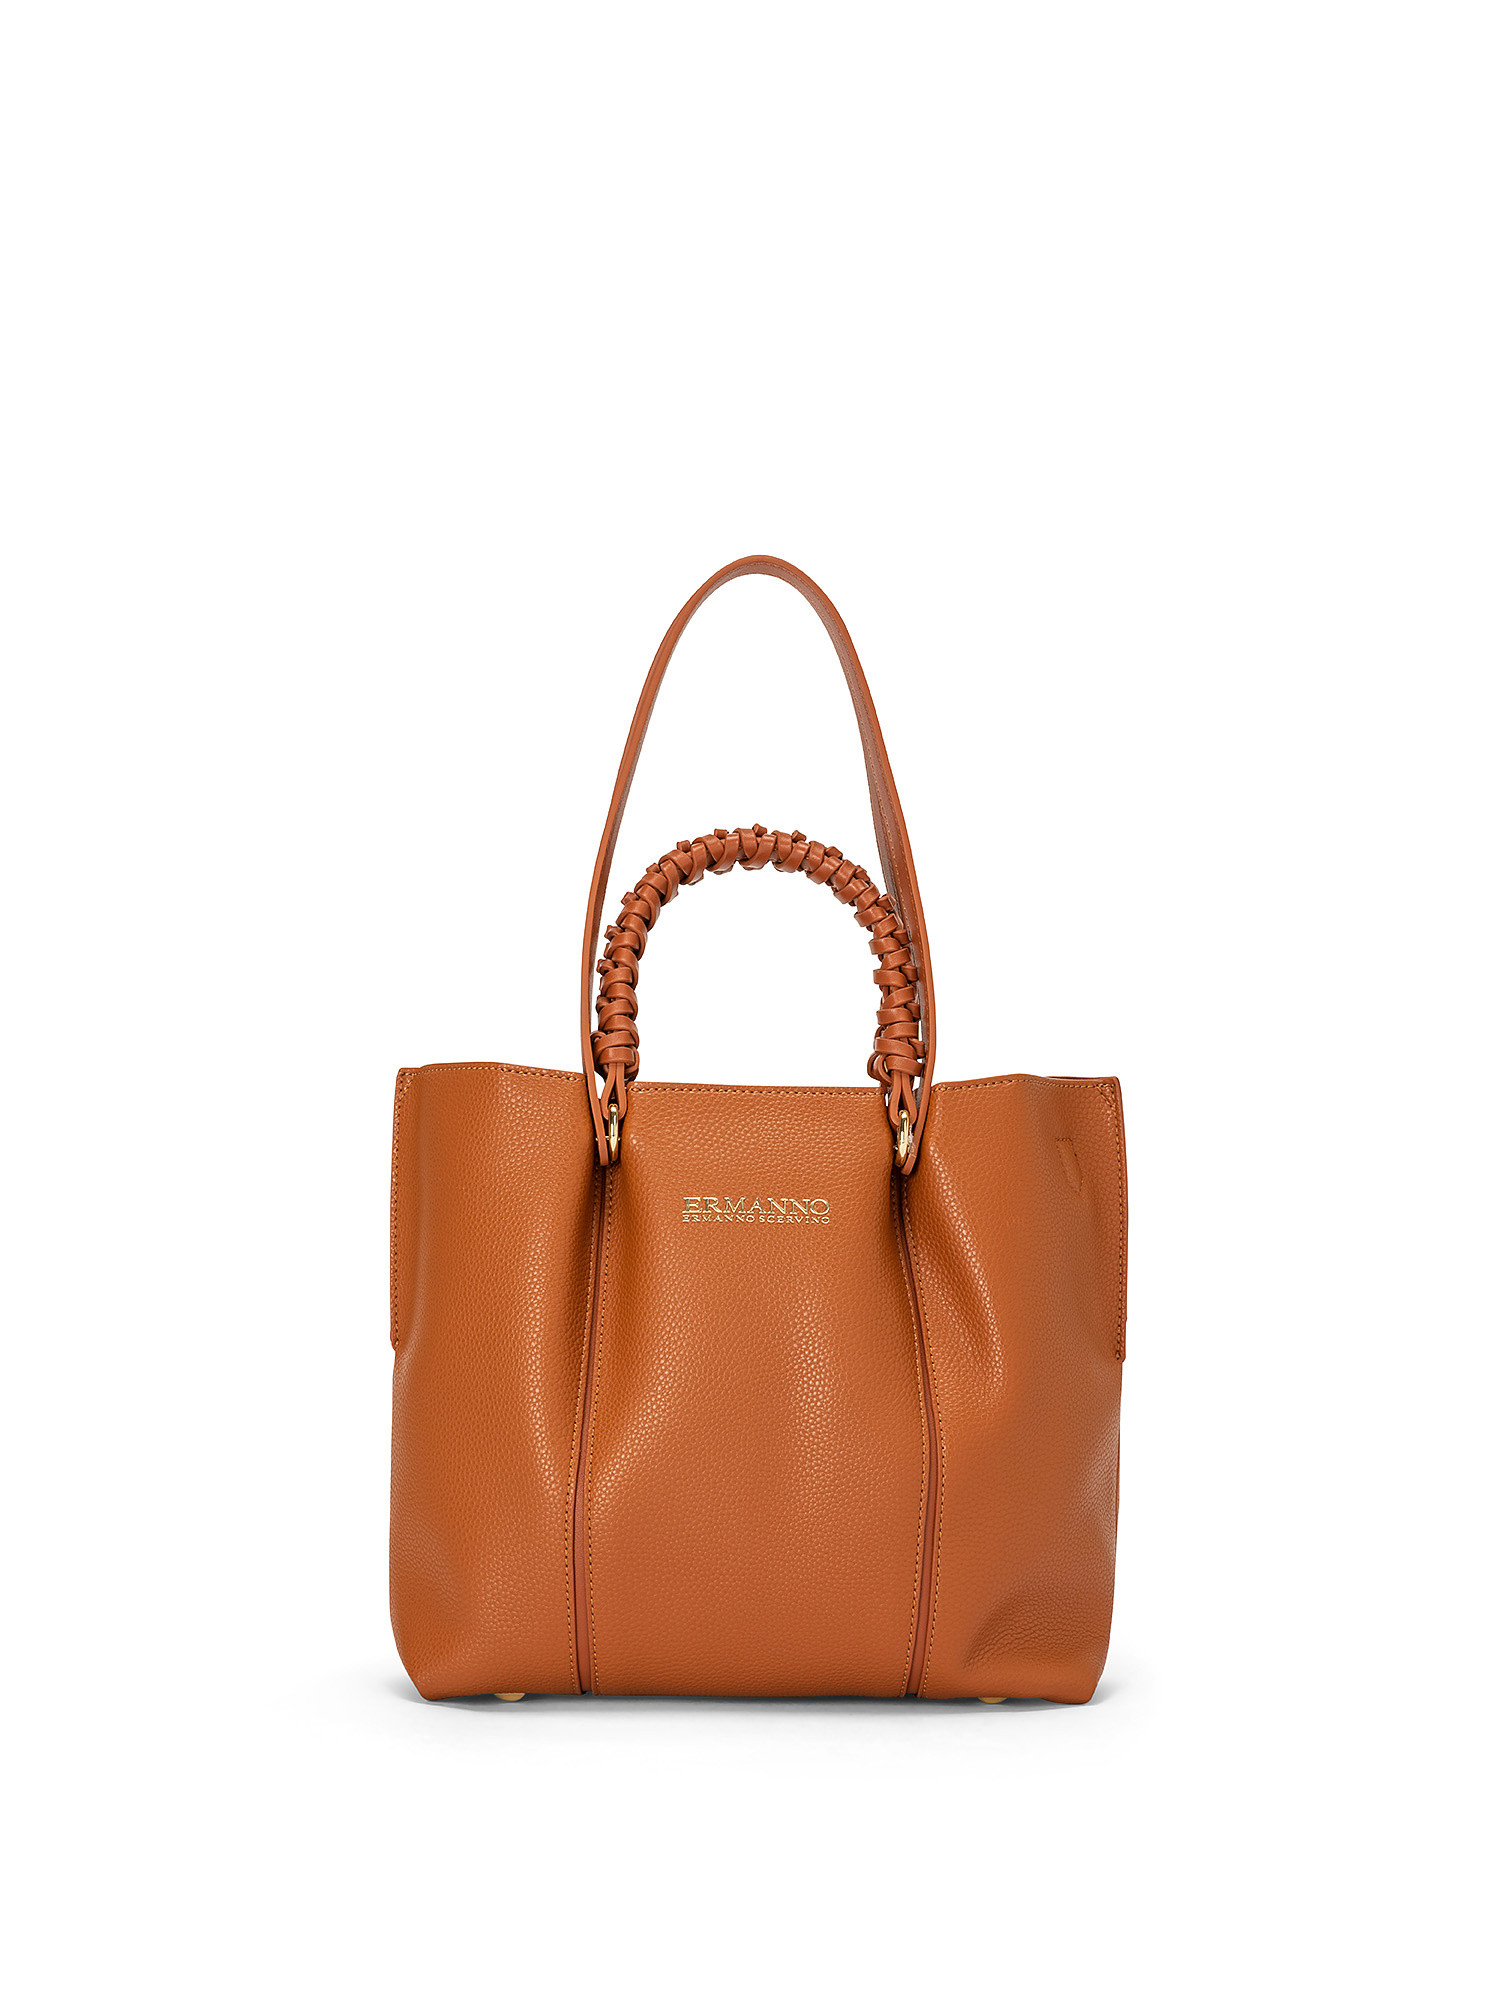 Small Marion bag, Brown, large image number 0